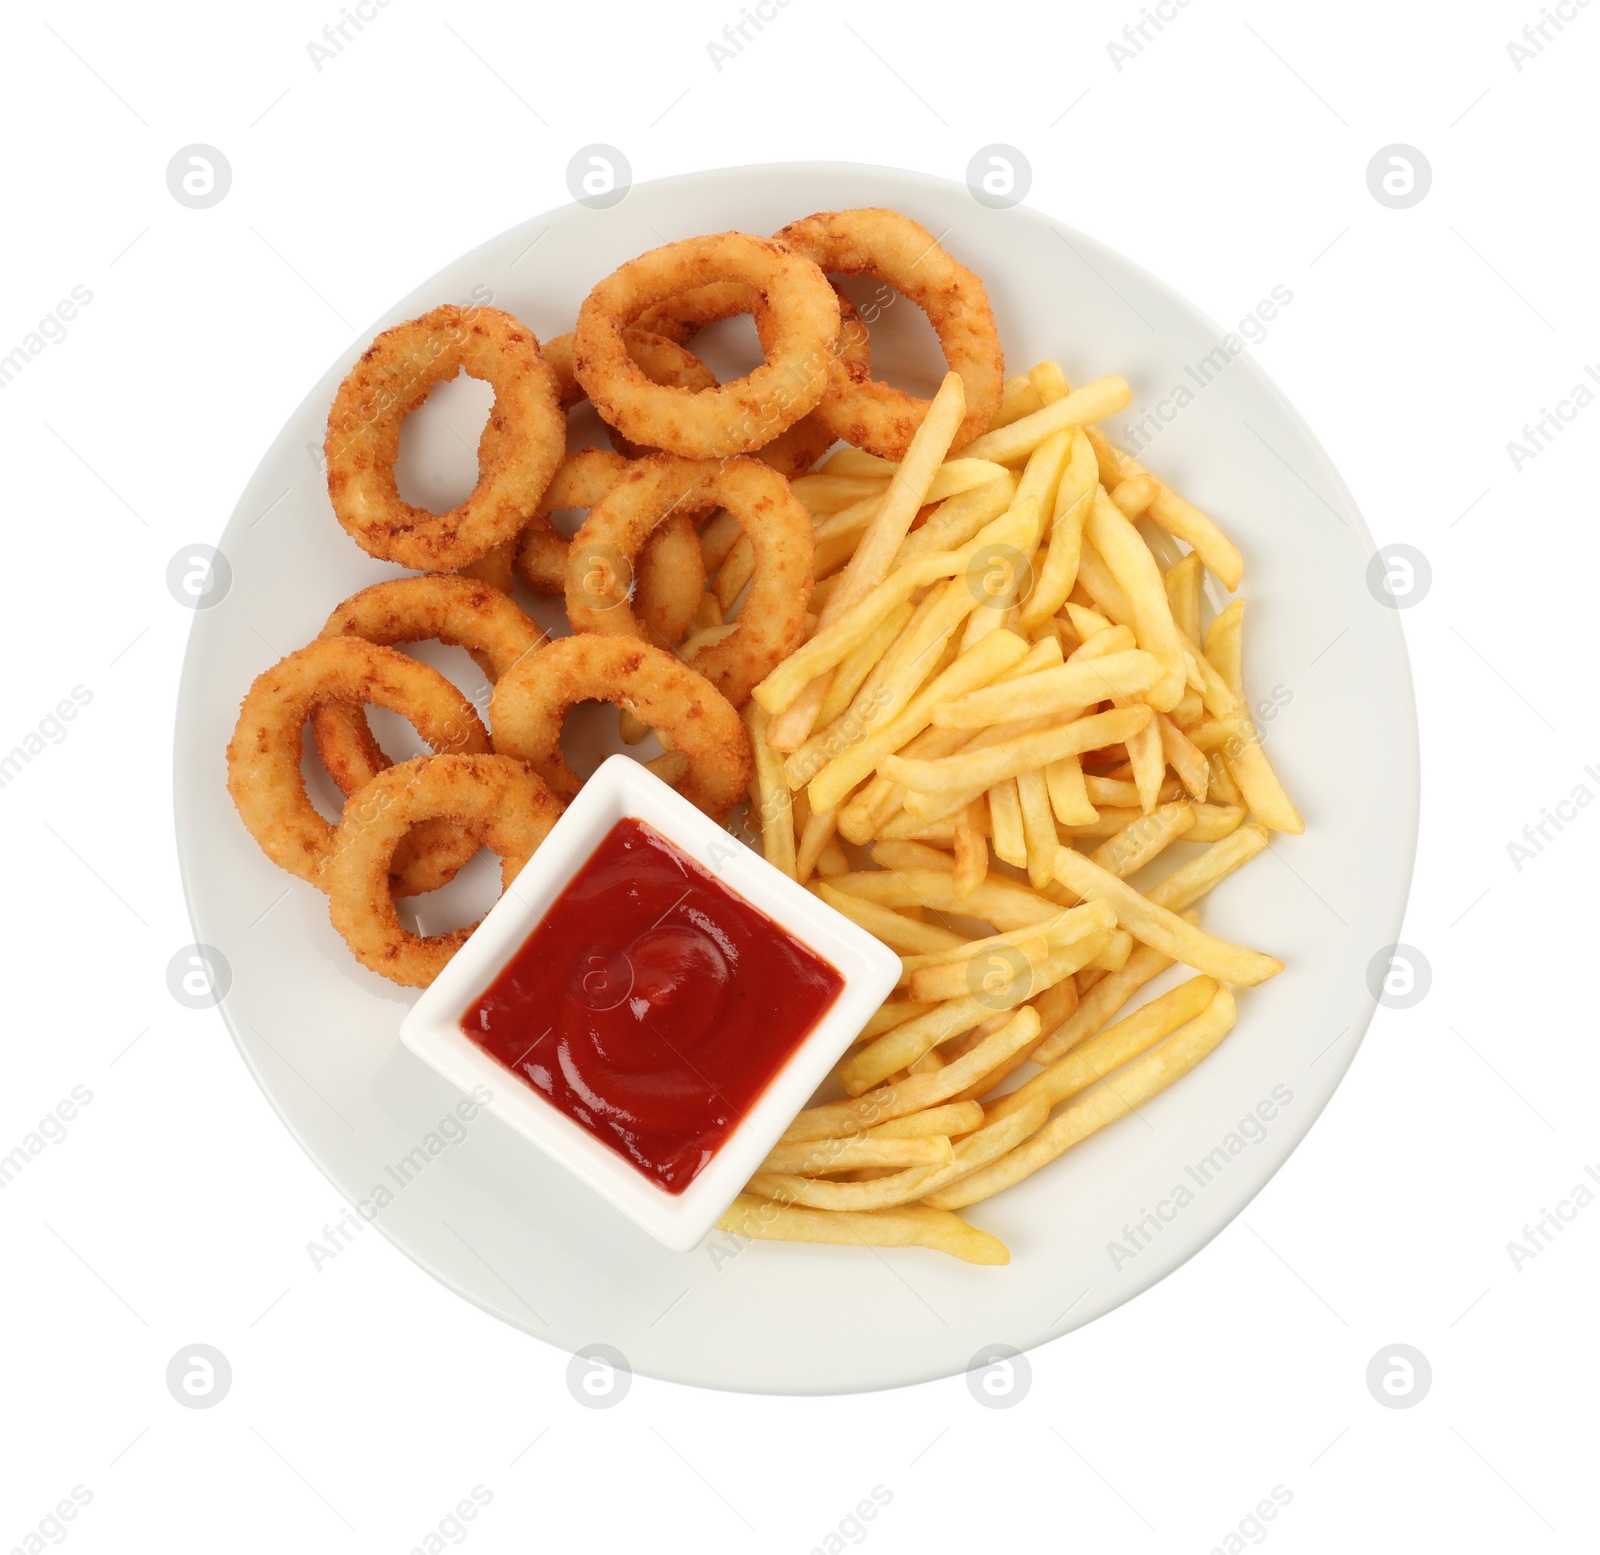 Photo of Tasty fried onion rings and french fries with ketchup on white background, top view